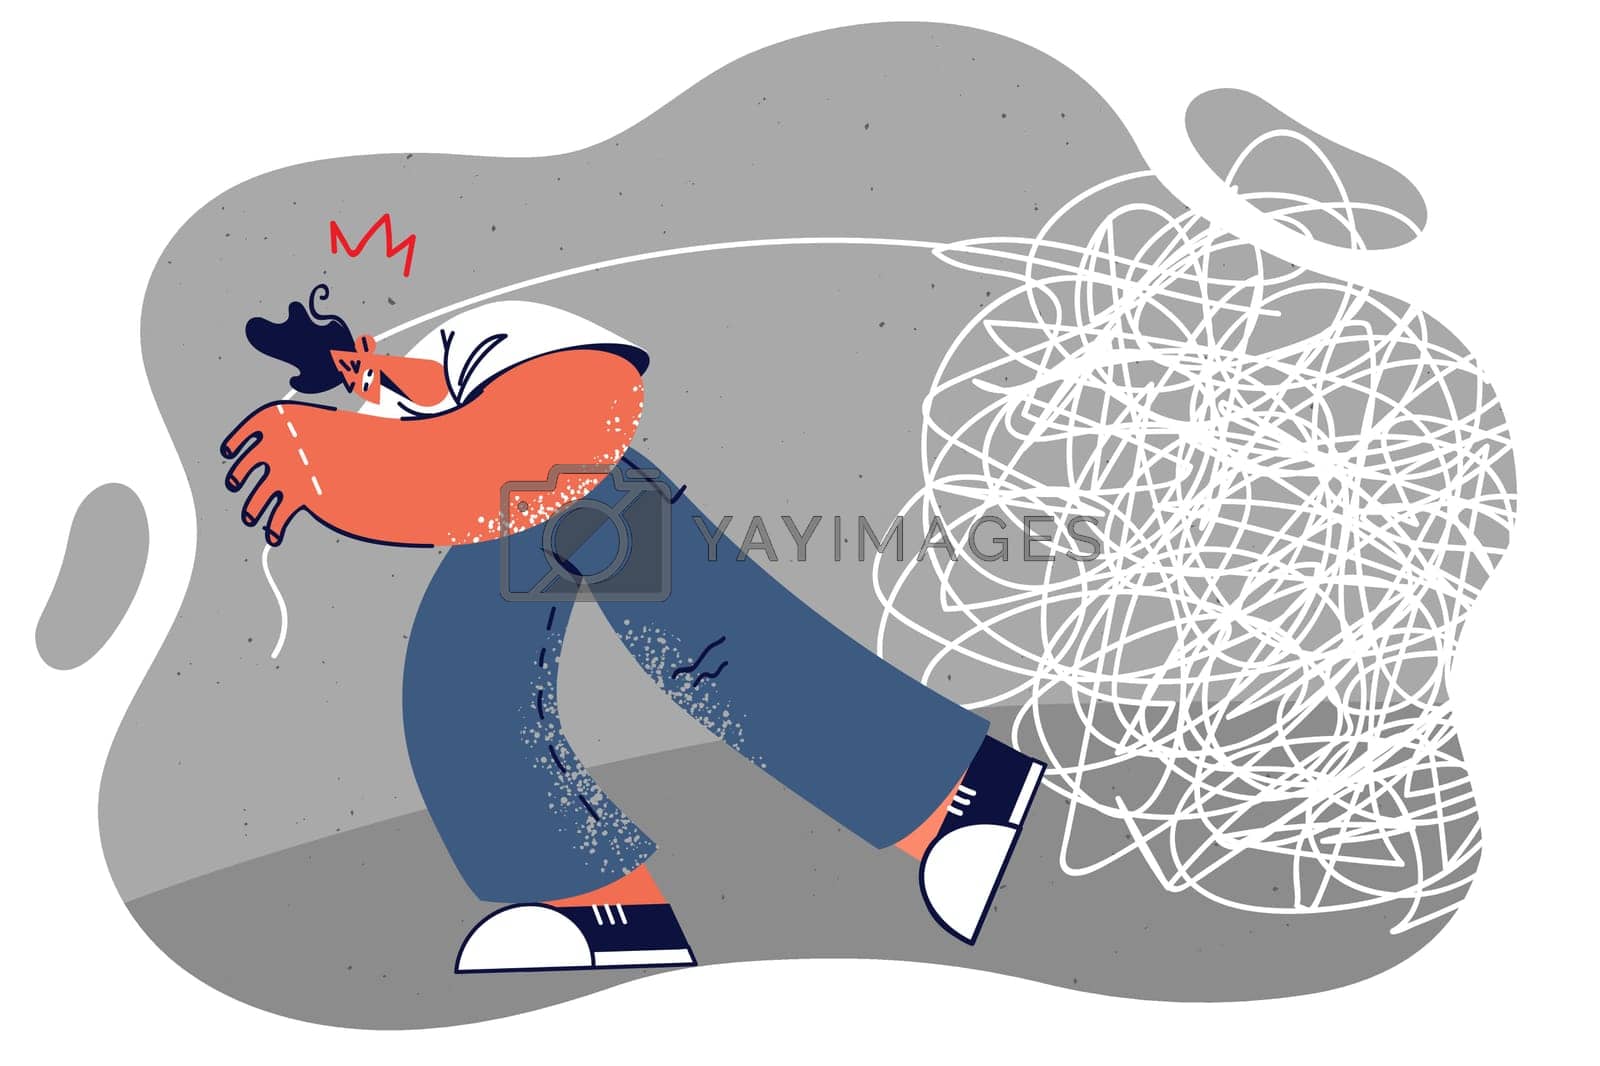 Royalty free image of Man pulls large clot symbolizing problems from past that make it difficult to move forward by Vasilyeu